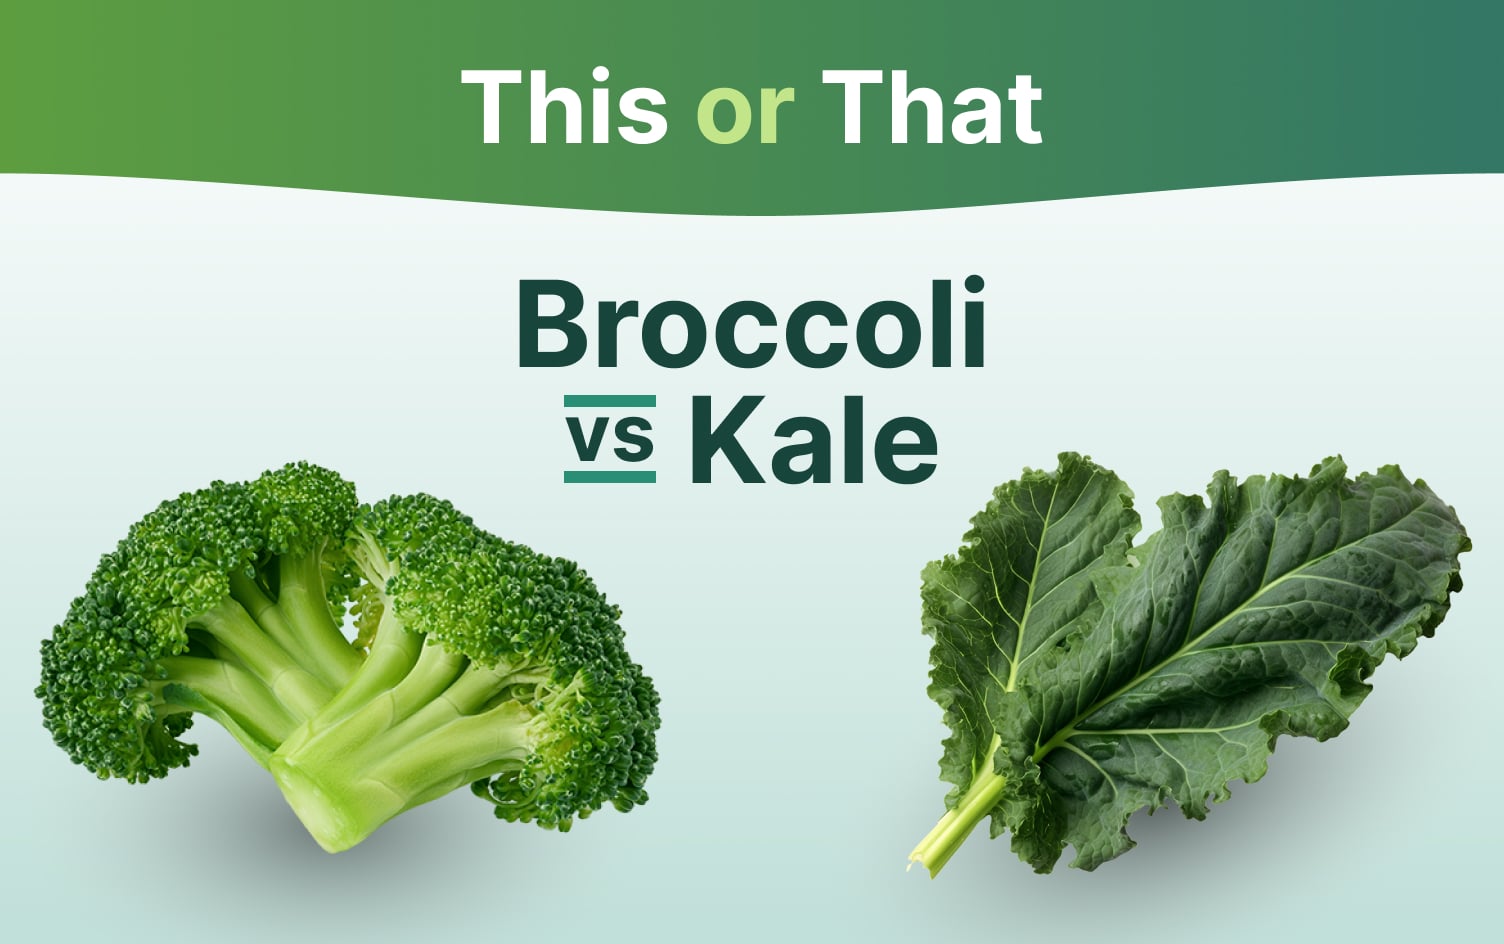 This or That: Is Kale Healthier Than Broccoli?